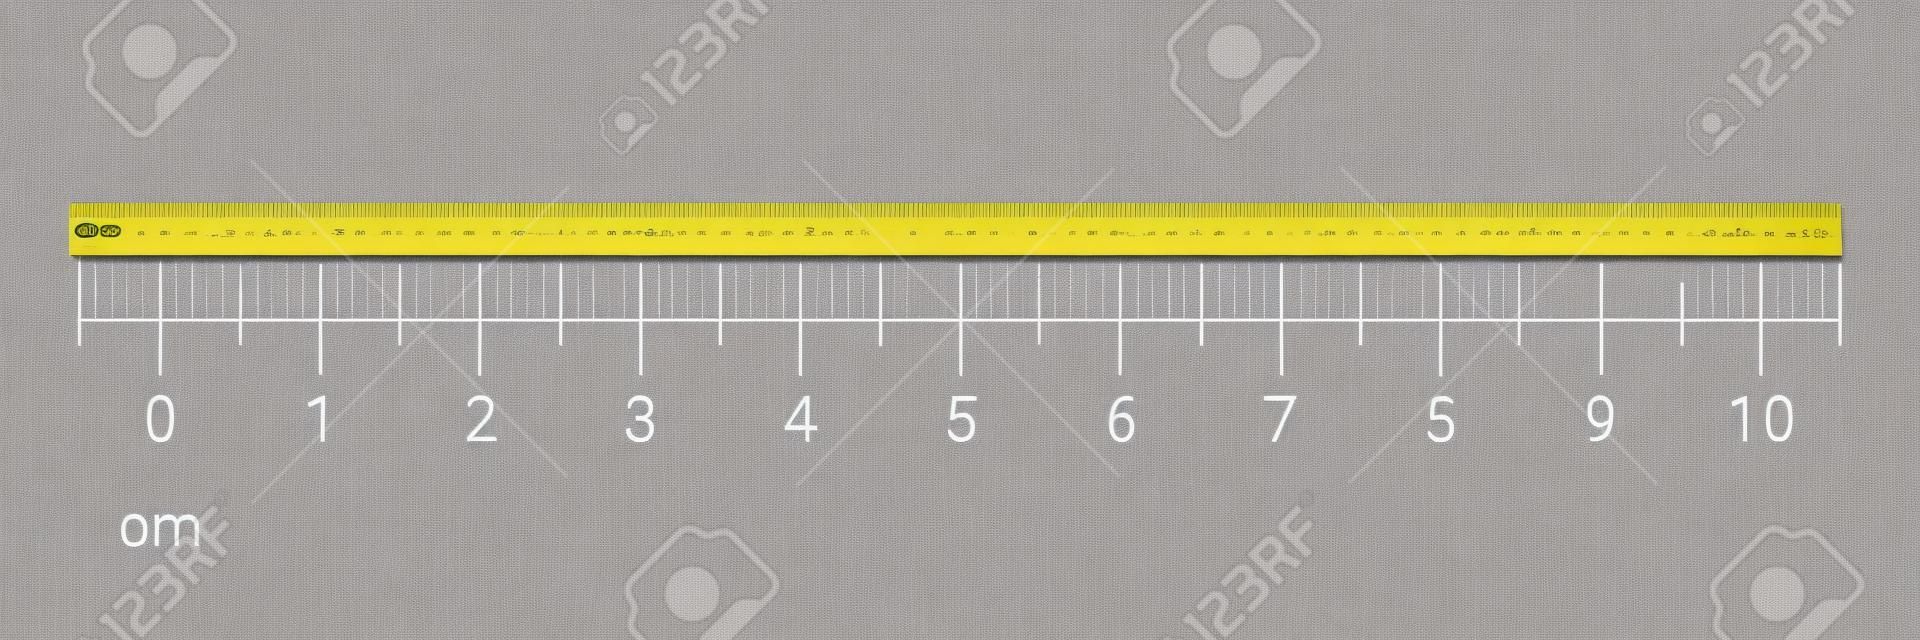 10 centimeters ruler measurement tool with numbers scale. Vector cm chart with millimeter grid system